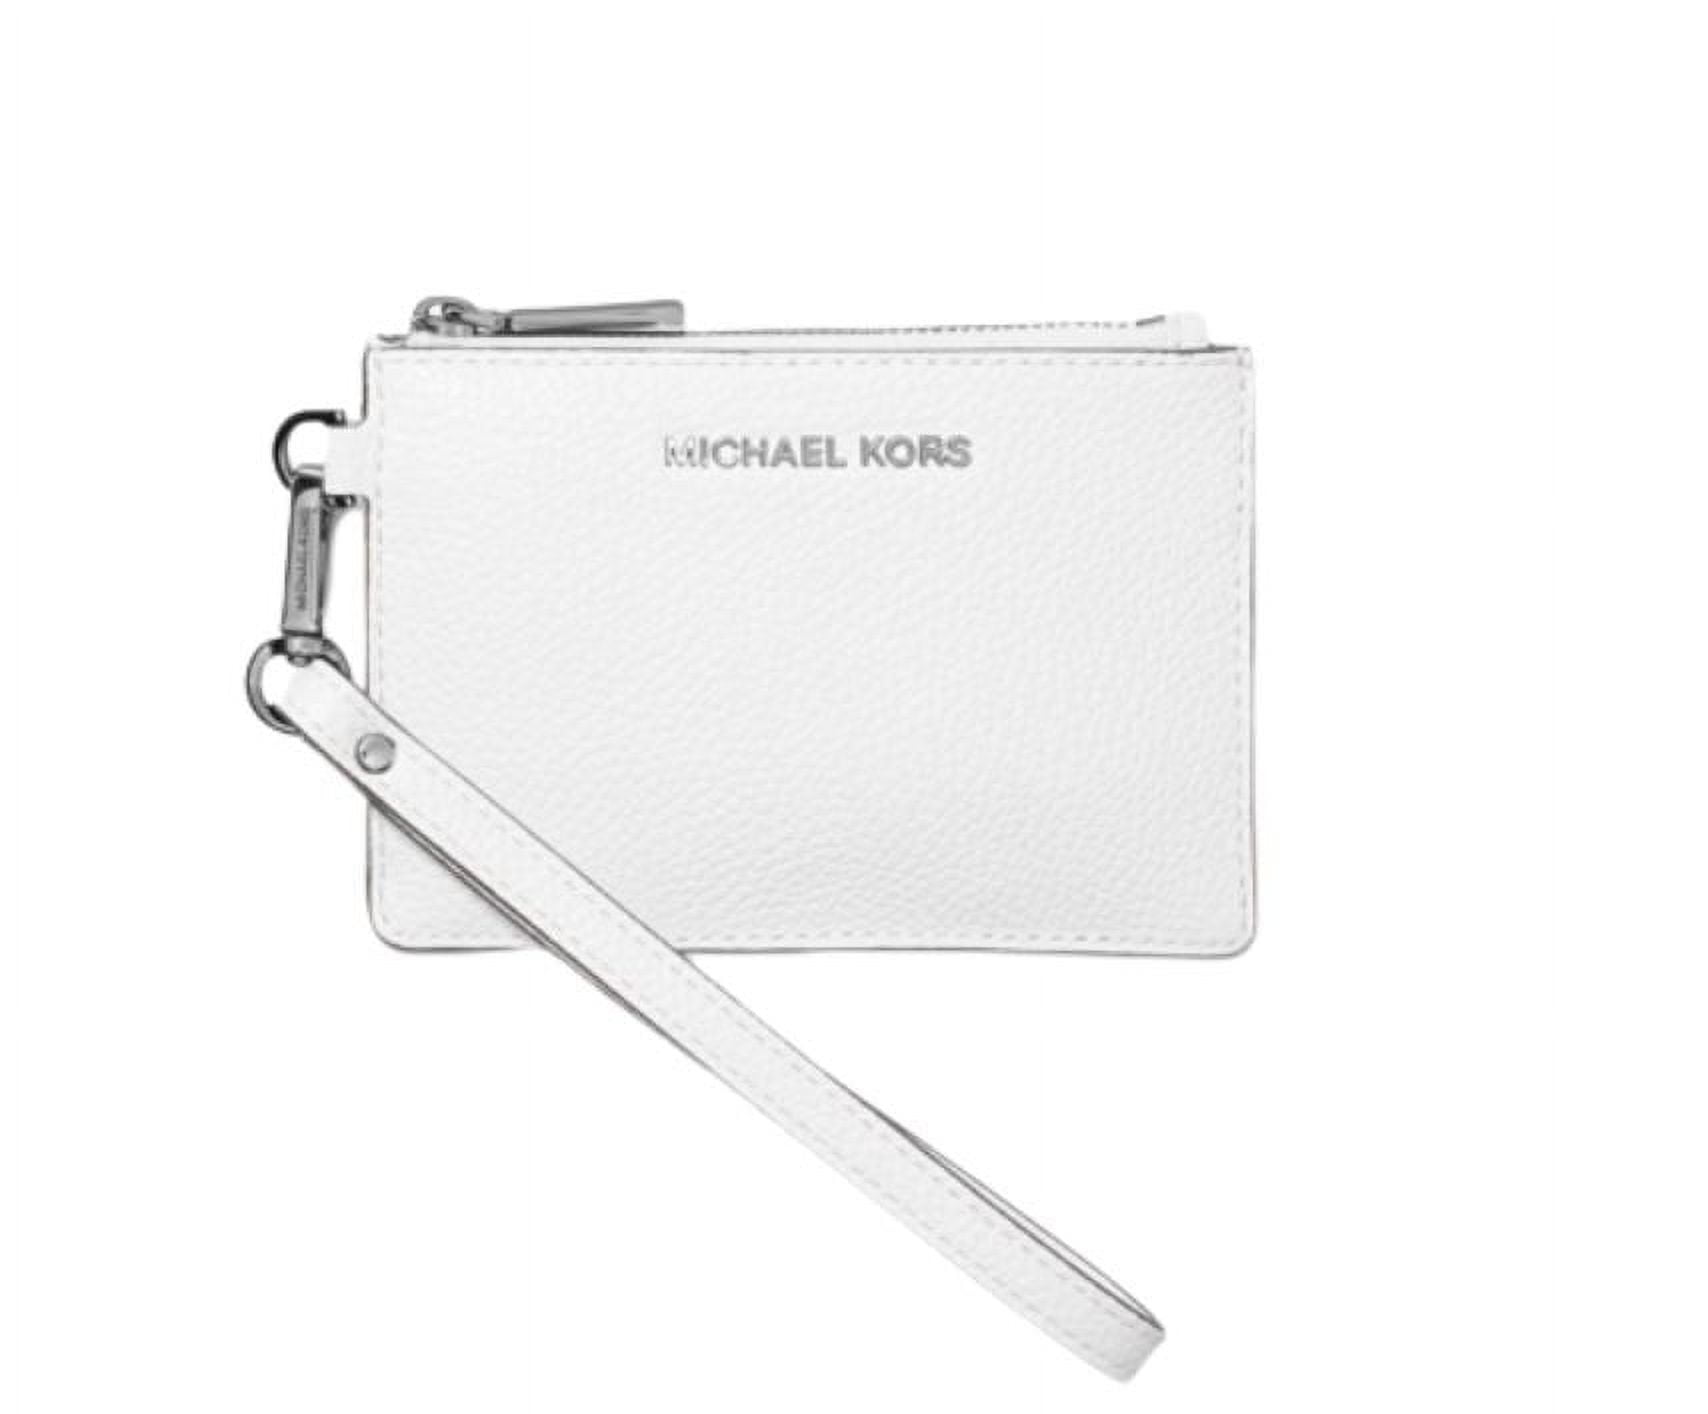 Michael Kors Small Coin Purse Black One Size